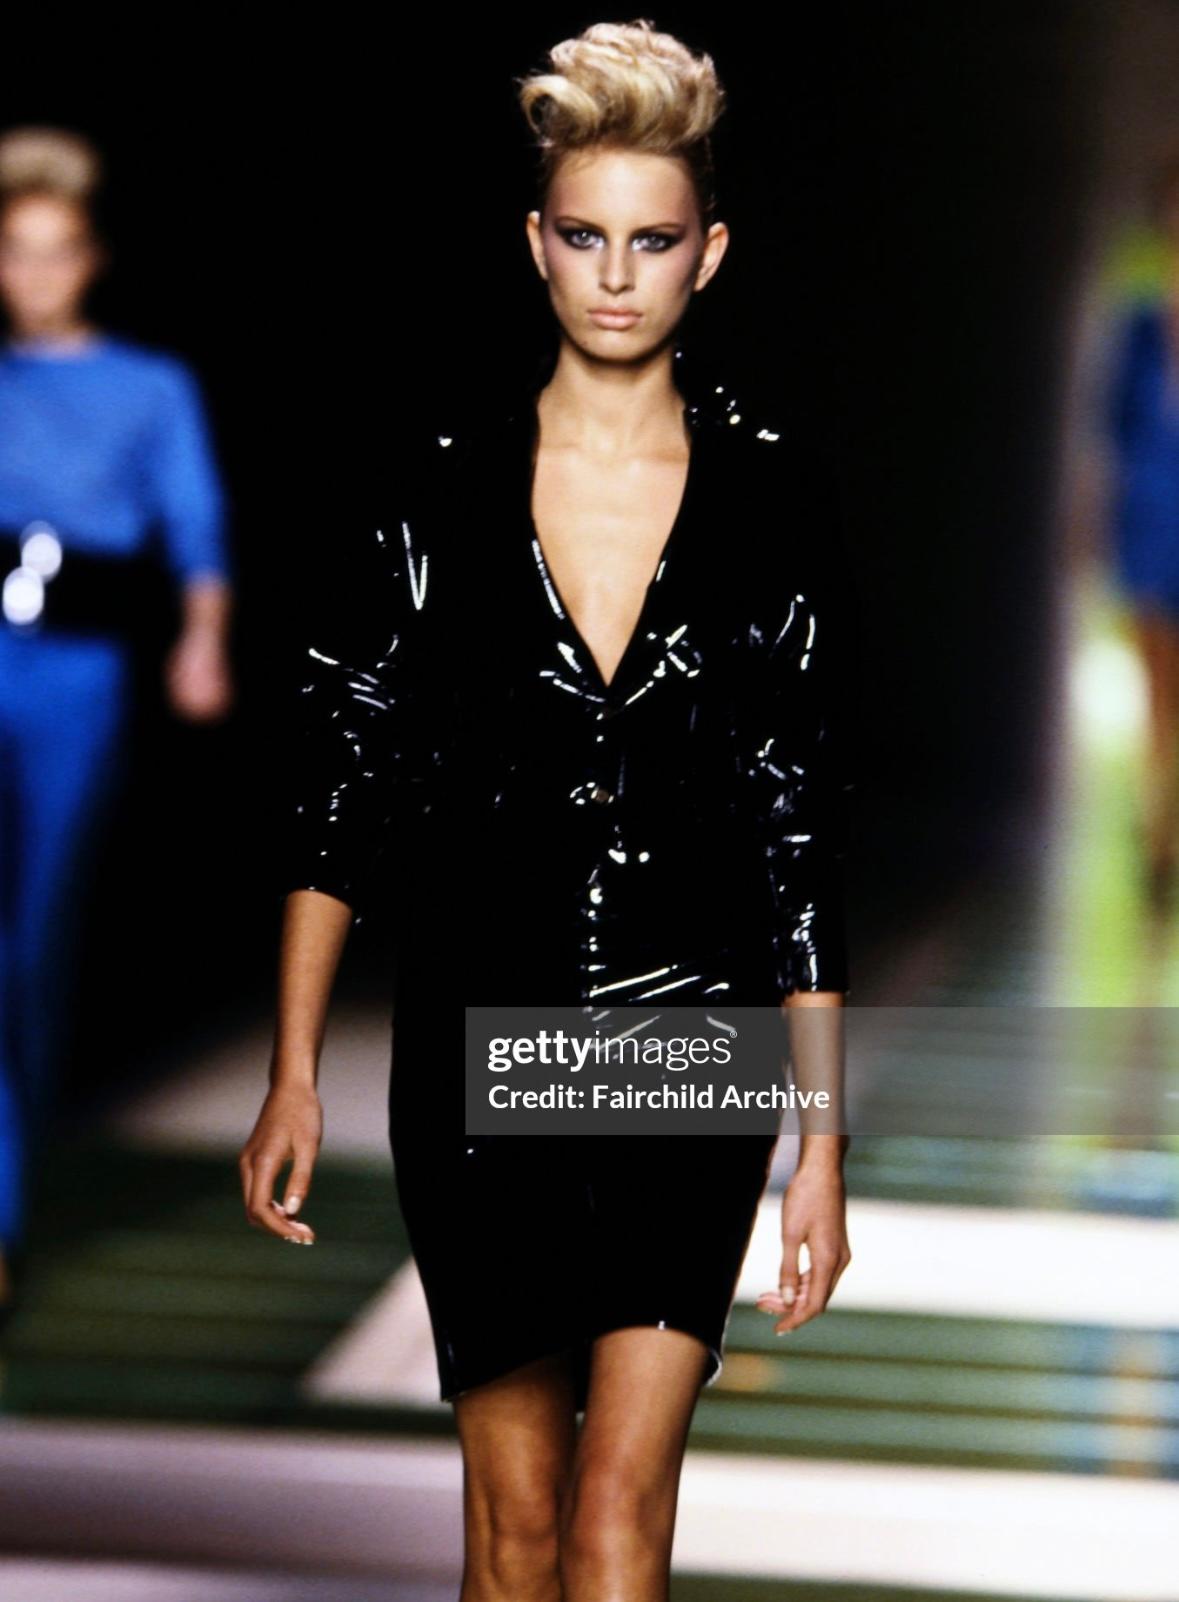 Presenting a fabulous black patent leather Gianni Versace skirt suit, designed by Donatella Versace. From the Spring/Summer 2001 collection, this suit debuted on the season's runway as look 17, modeled by Karolina Kurkova, with the skirt also being